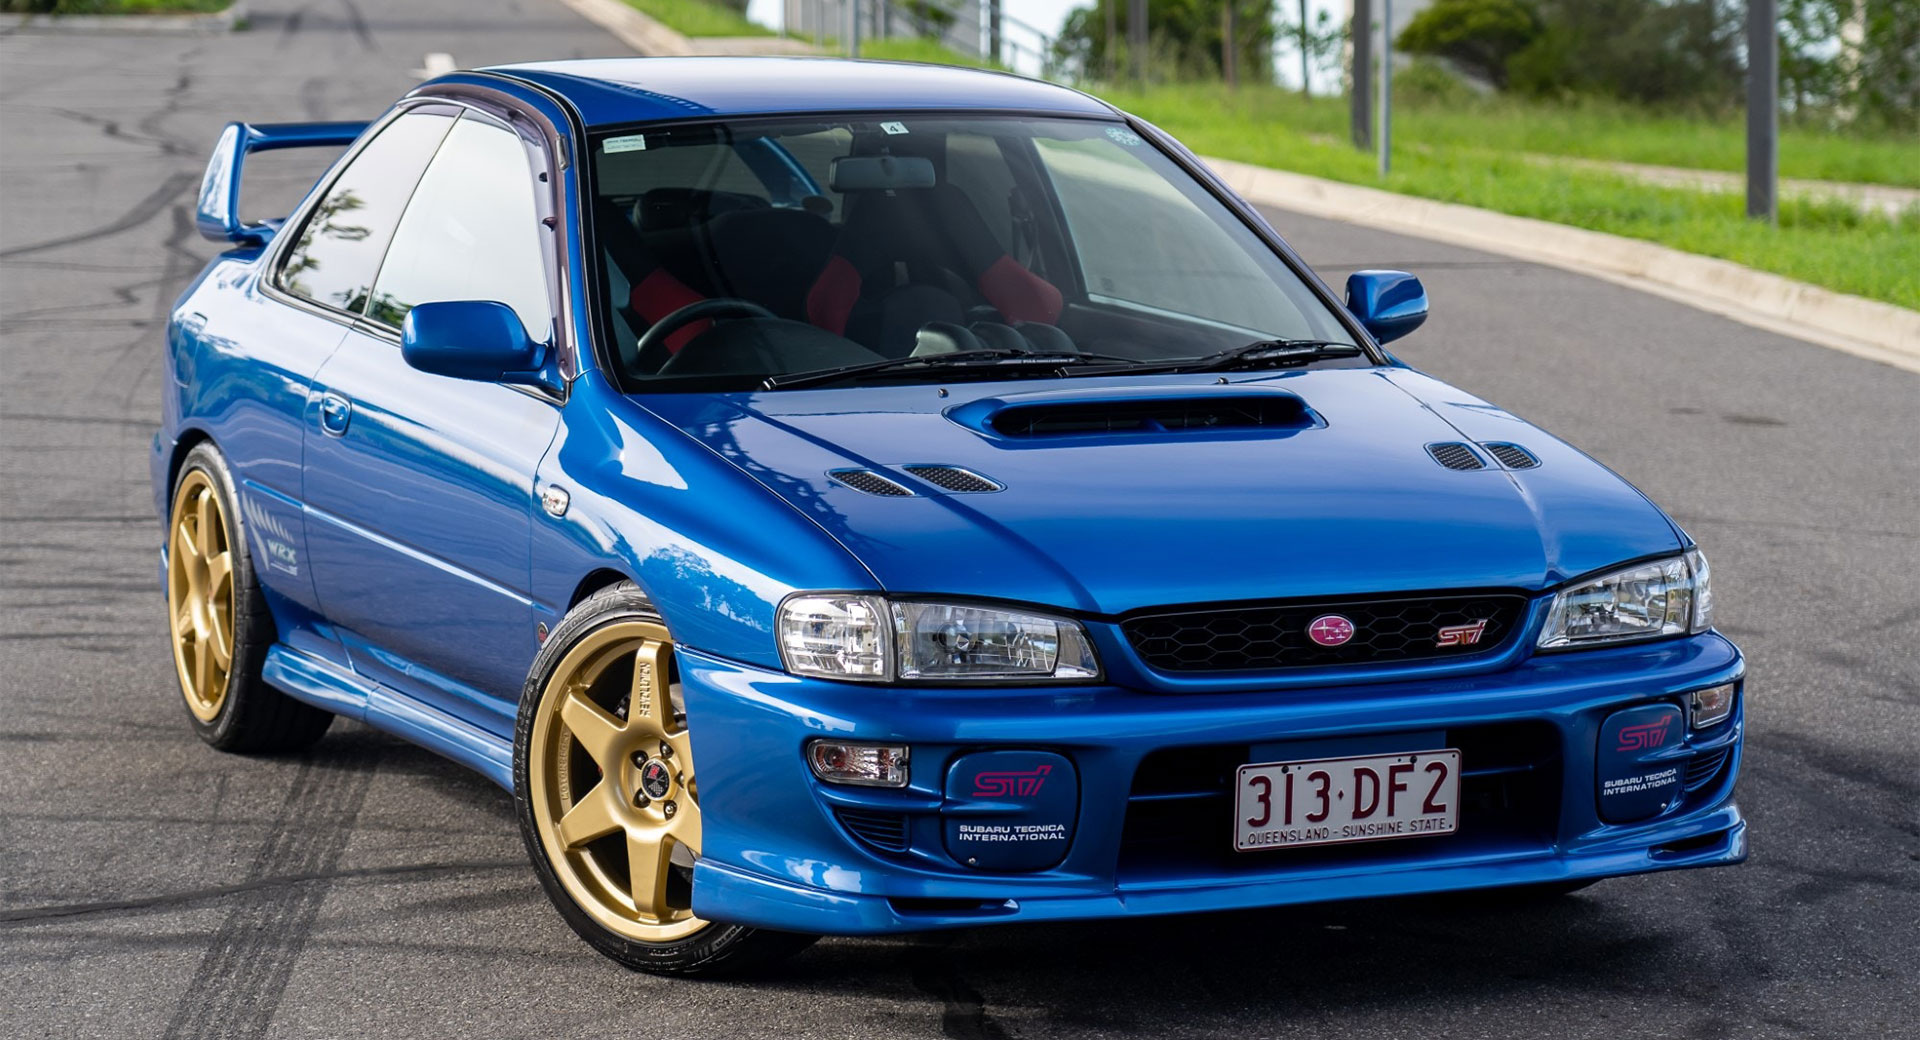 These Two Subaru Impreza Wrx Sti Type Rs Are Proper Road-Going Rally Cars |  Carscoops